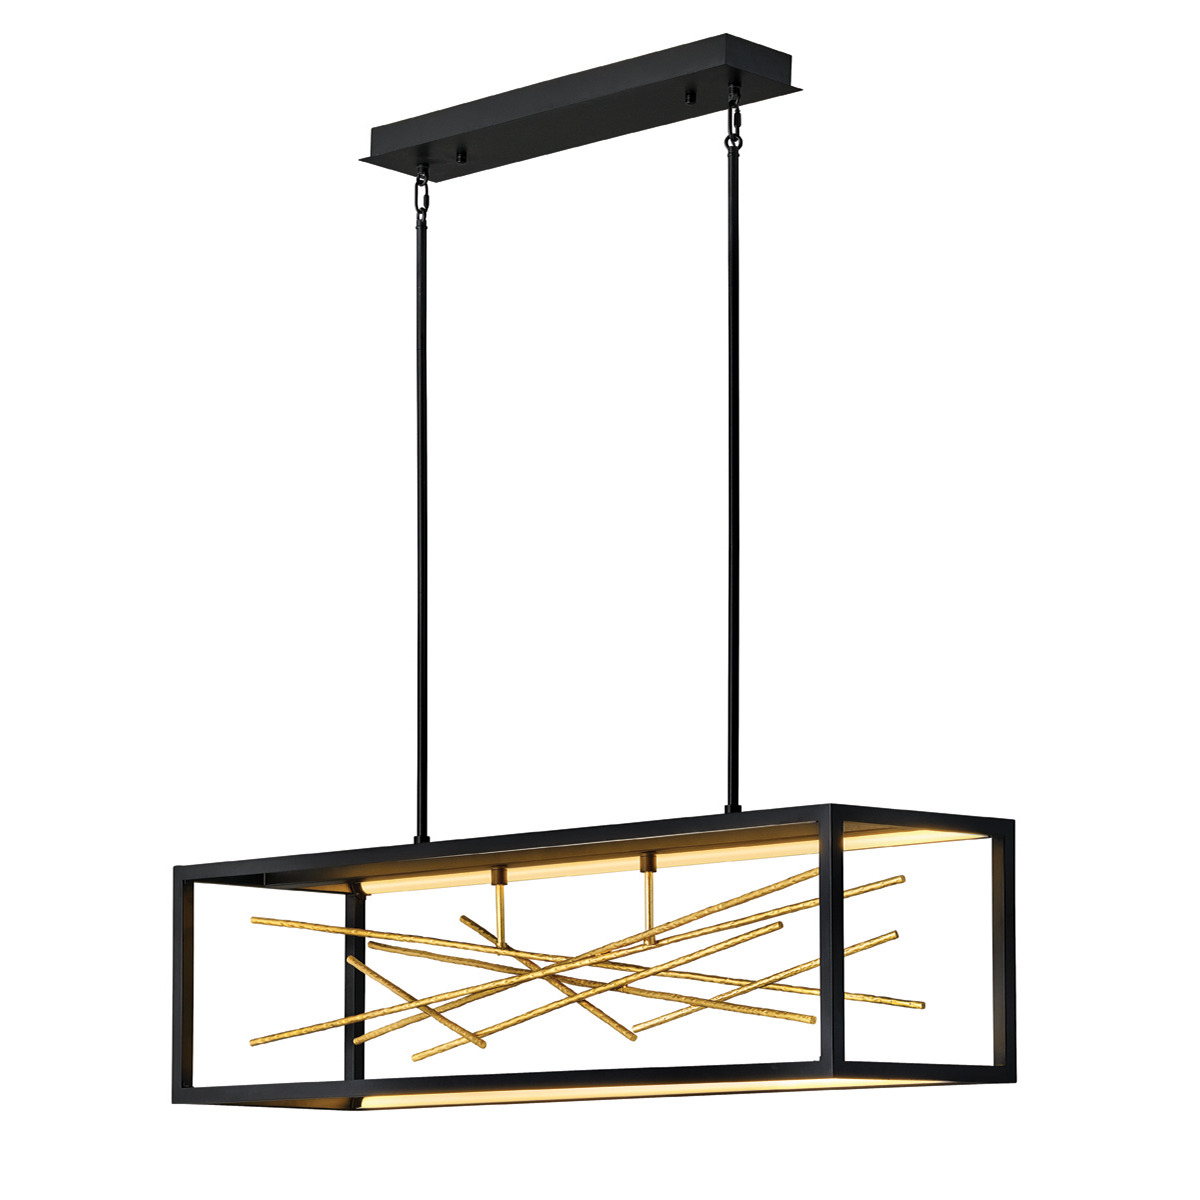 Quintiesse QN-STYX-LED-ISLE-BG Styx Dimmable LED Island Pendant Light In Black And Gold Finish